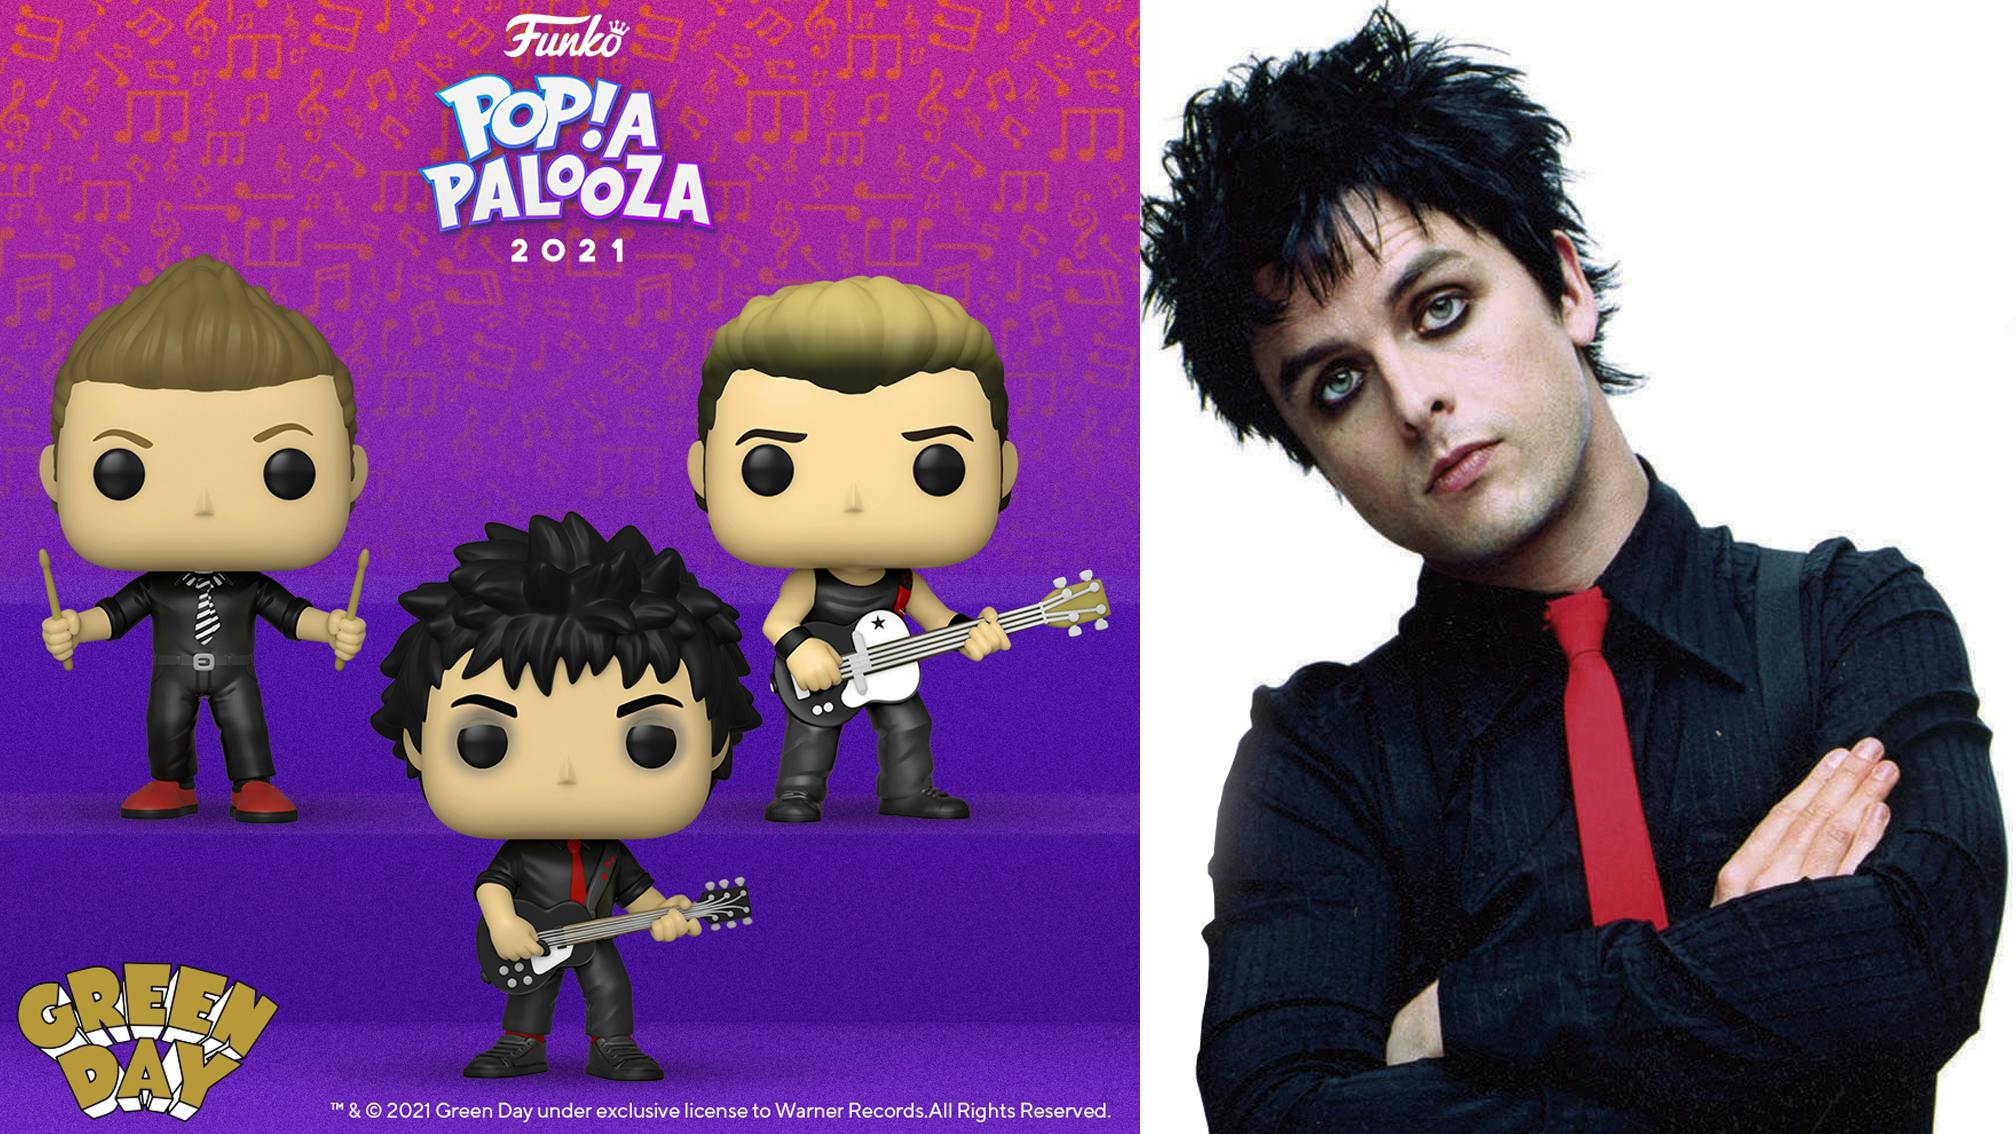 Exclusive first look: Green Day Funko POP!s are finally here and they absolutely rule